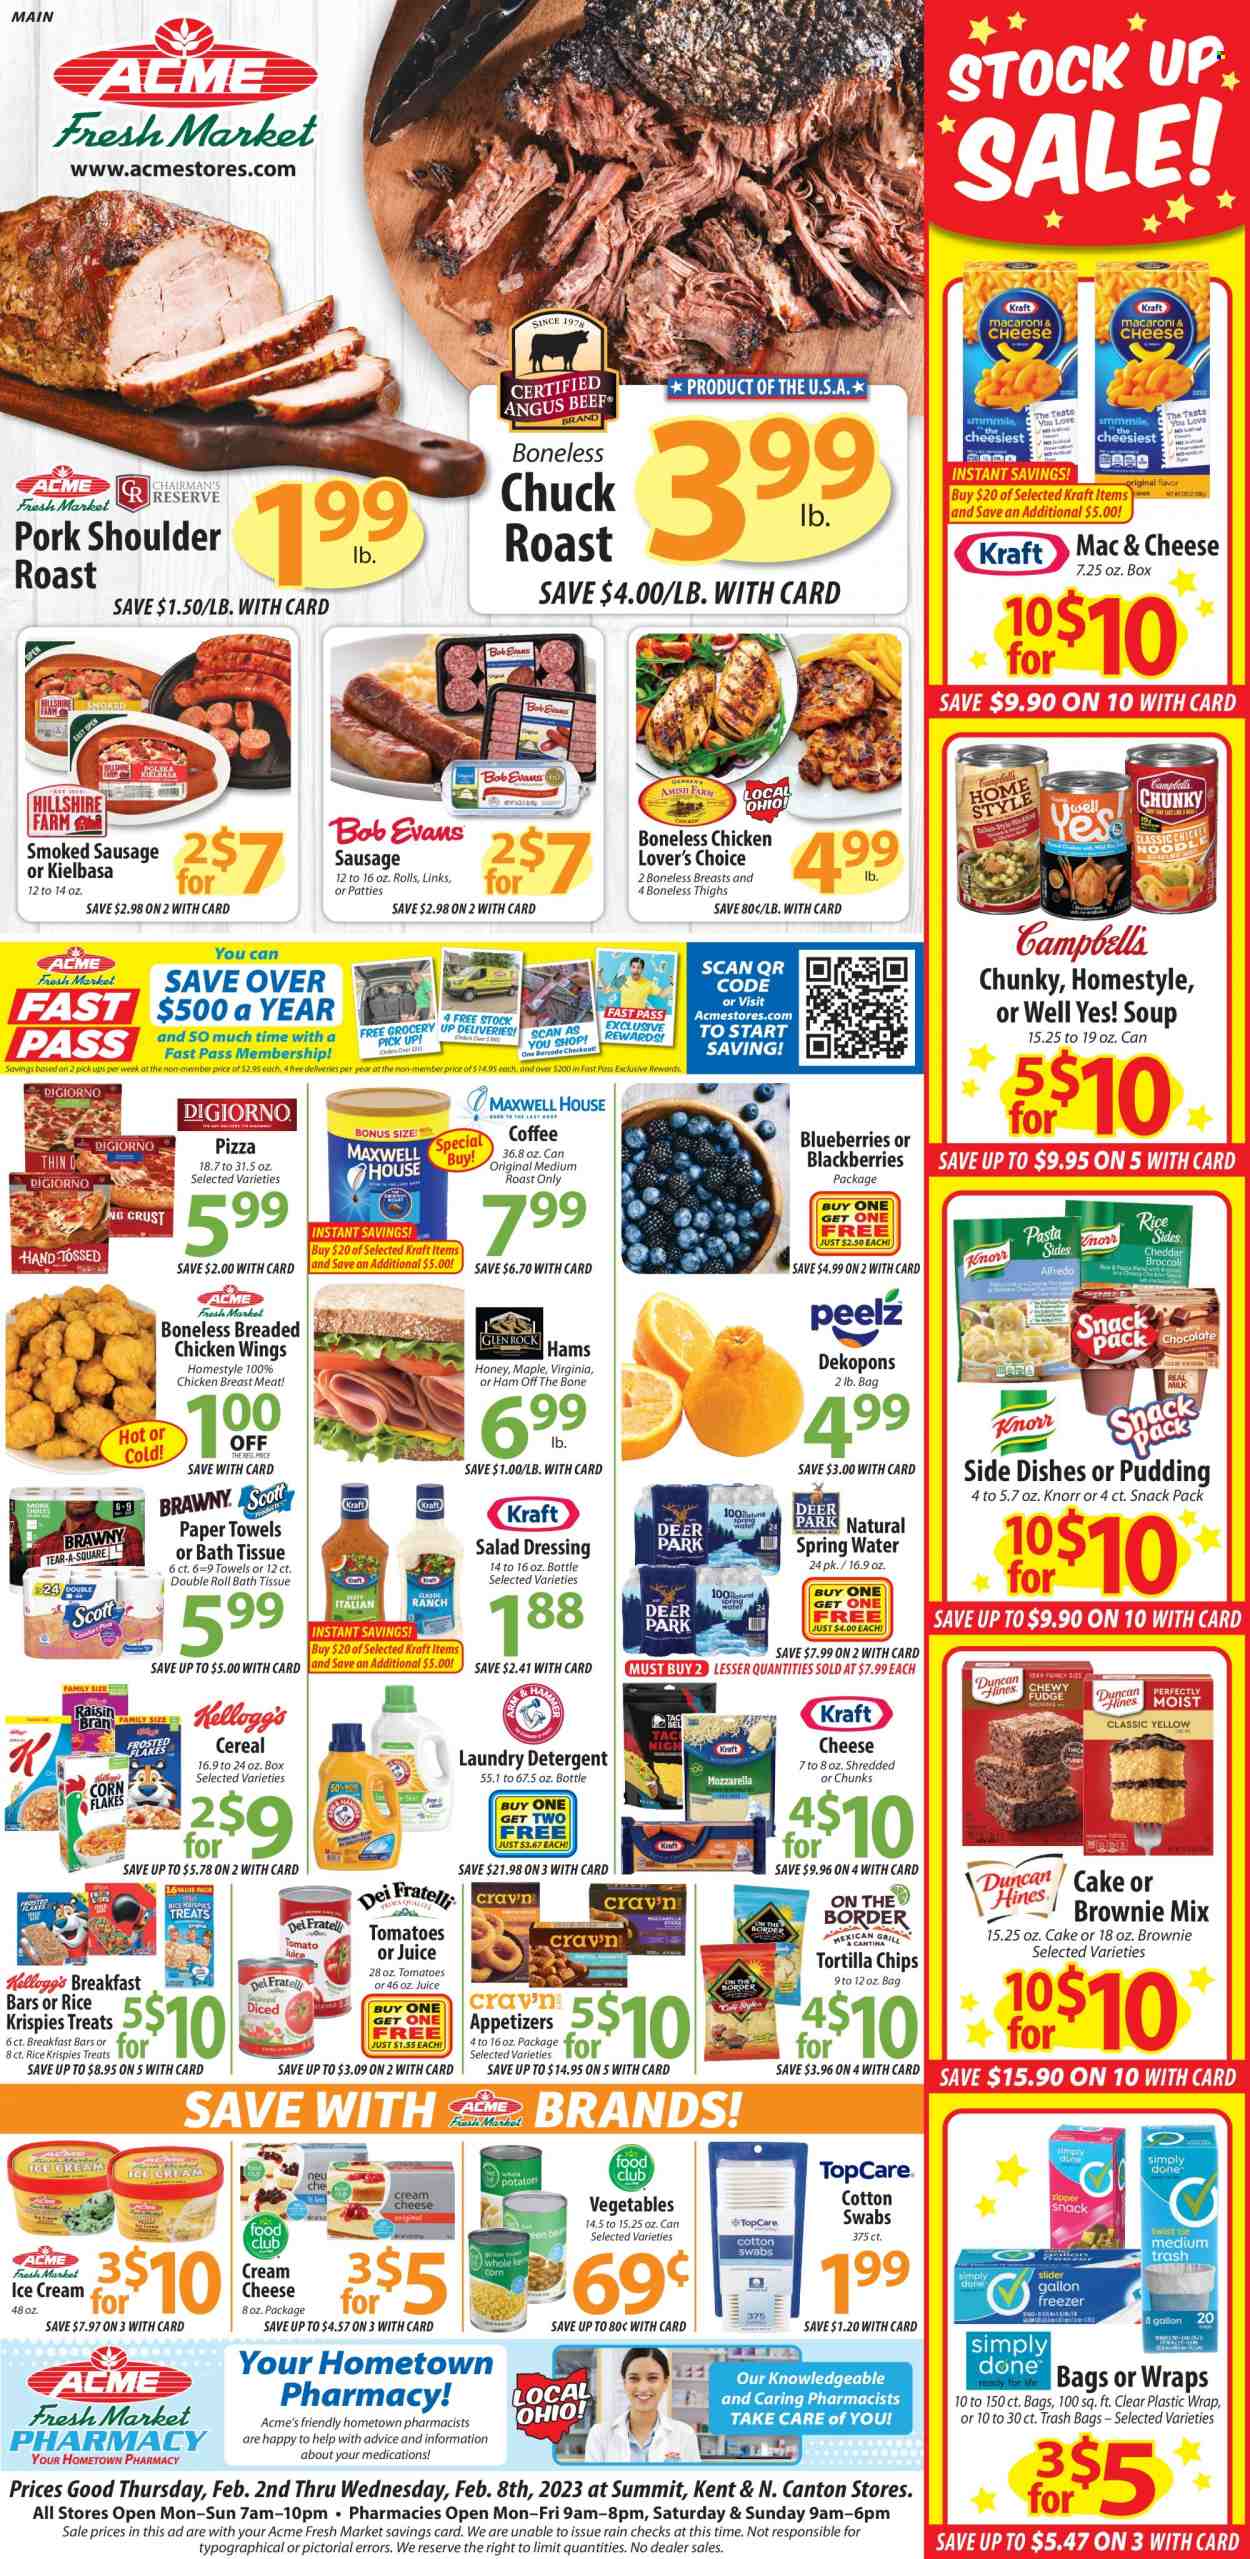 thumbnail - ACME Fresh Market Flyer - 02/02/2023 - 02/08/2023 - Sales products - cake, wraps, brownie mix, blackberries, blueberries, pizza, soup, Knorr, fried chicken, Kraft®, ham off the bone, sausage, smoked sausage, kielbasa, cream cheese, pudding, ice cream, tortilla chips, chips, cereals, Rice Krispies, salad dressing, dressing, honey, juice, spring water, coffee, beef meat, chuck roast, pork meat, pork roast, pork shoulder, bath tissue, kitchen towels, paper towels, detergent, laundry detergent, trash bags. Page 1.